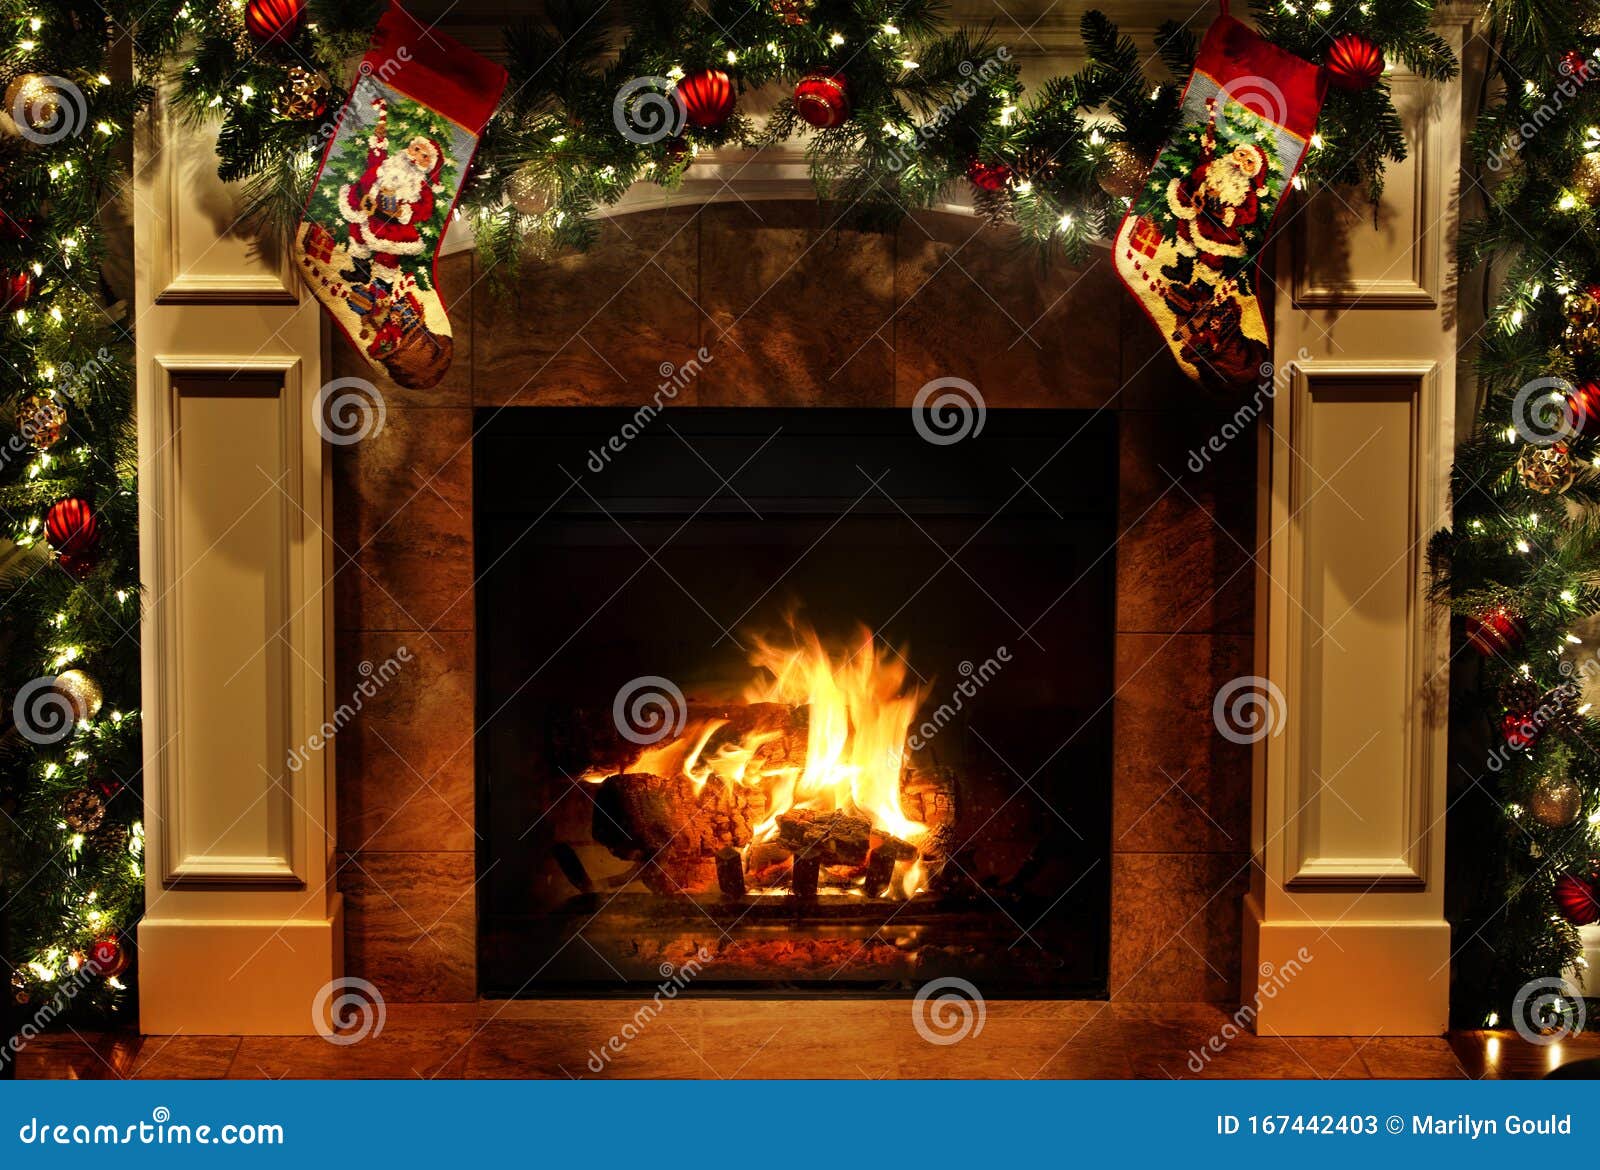 christmas fireplace with garlands and stockings